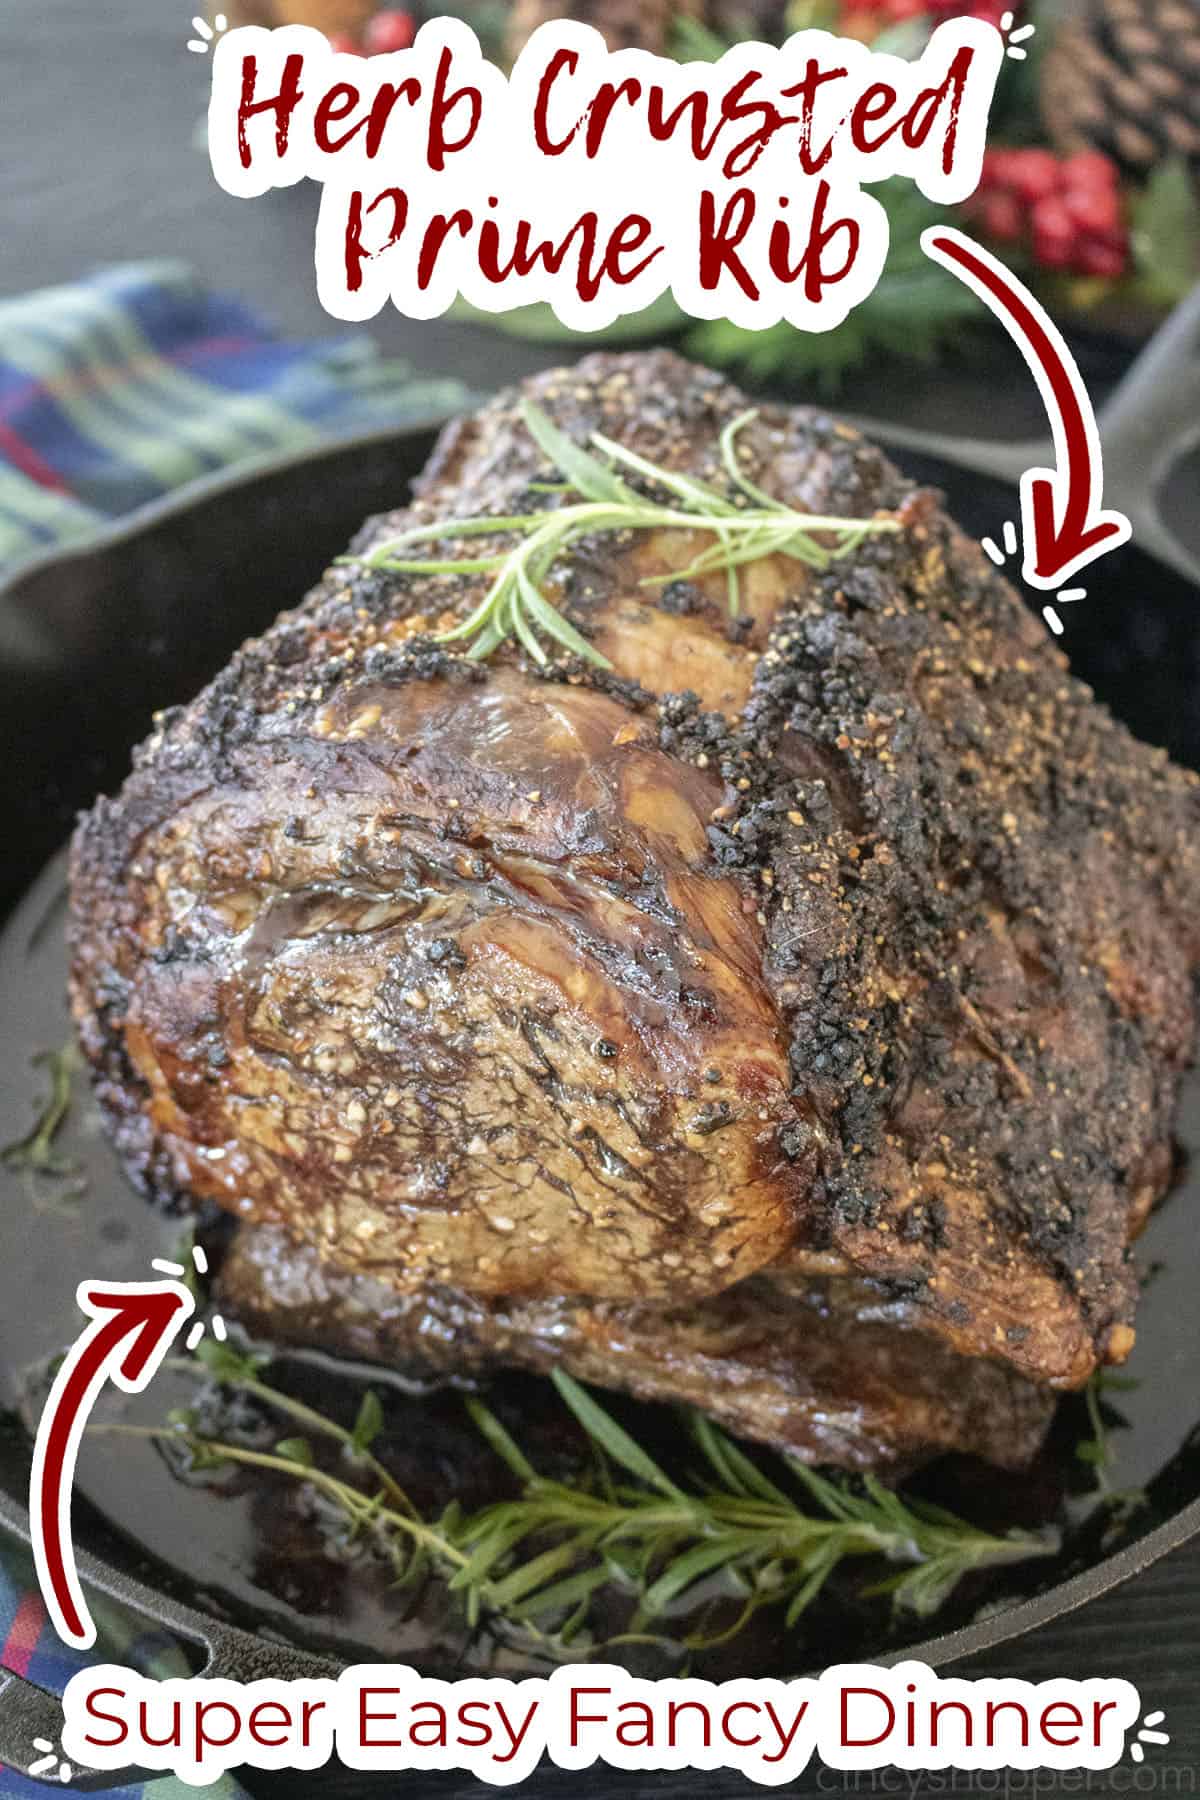 Text on image Herb Crusted Prime Rib Super Easy Fancy Dinner